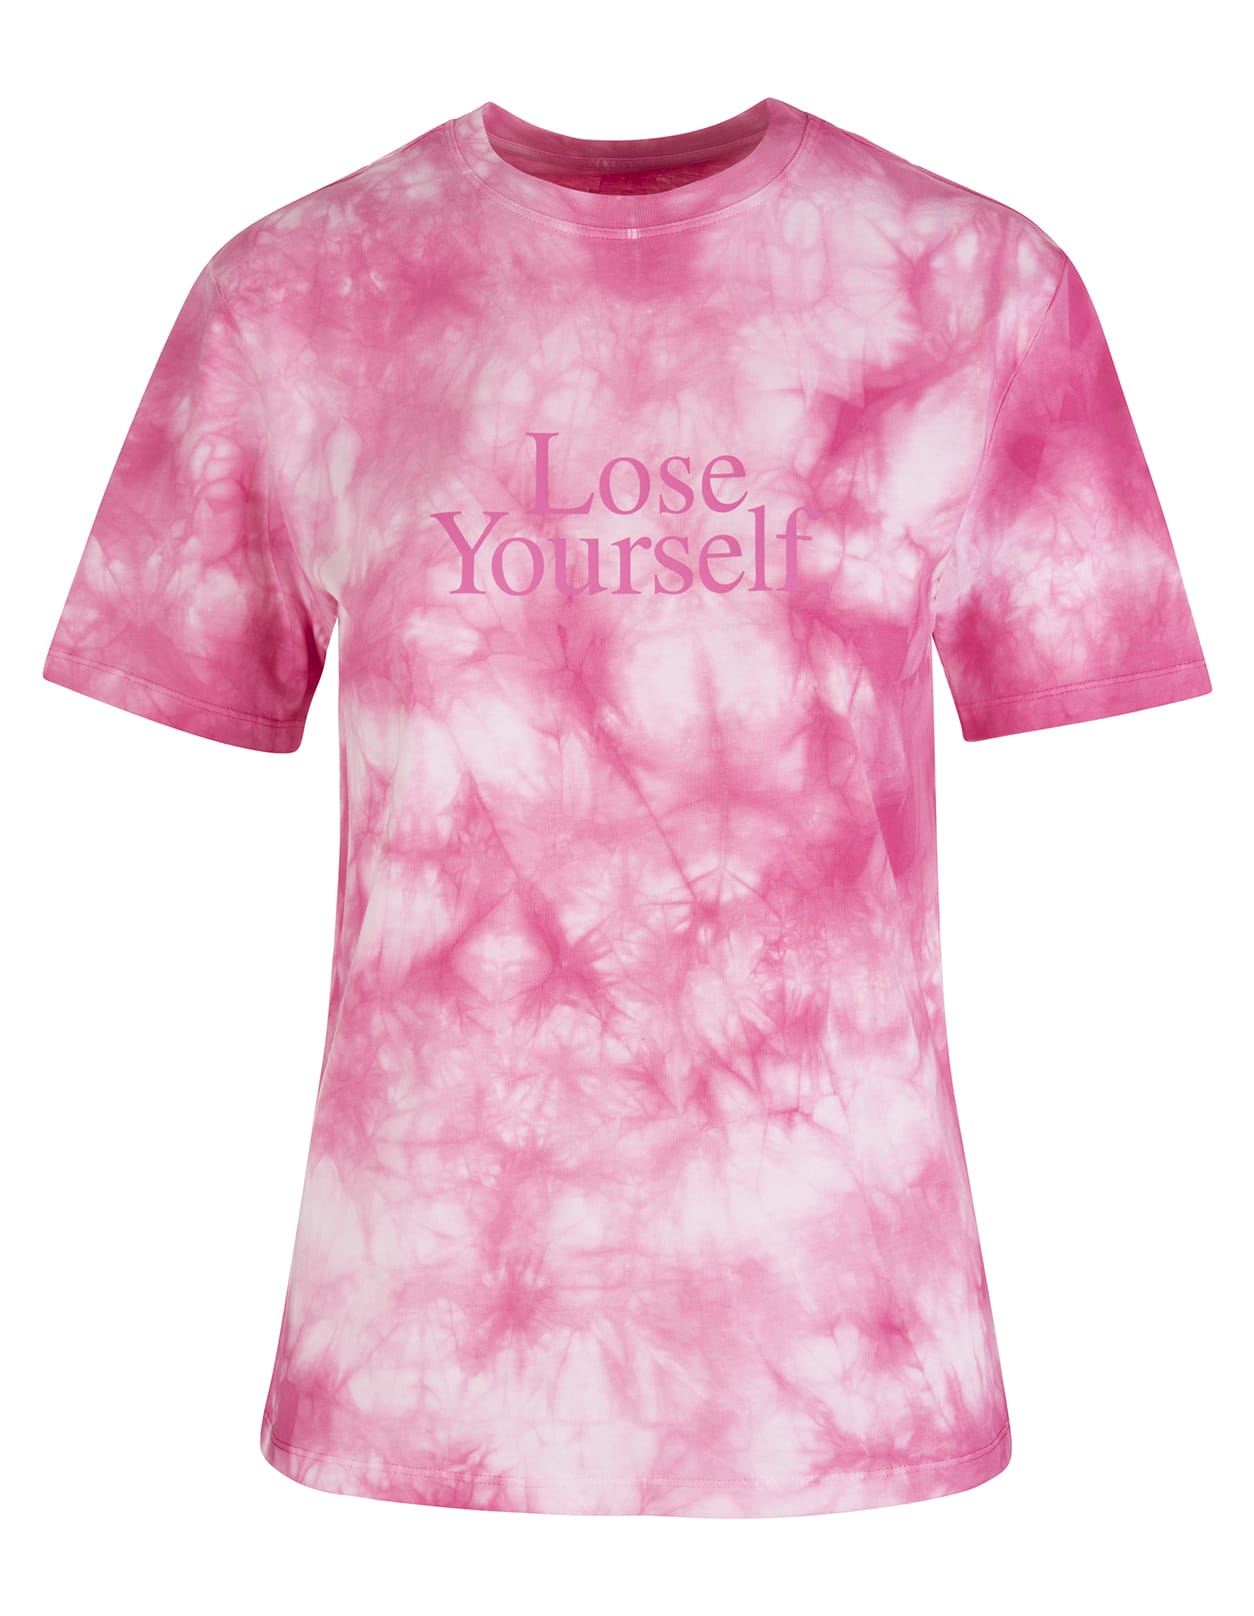 Paco Rabanne Woman lose Yourself T-shirt With Pink Tie Dye Motif